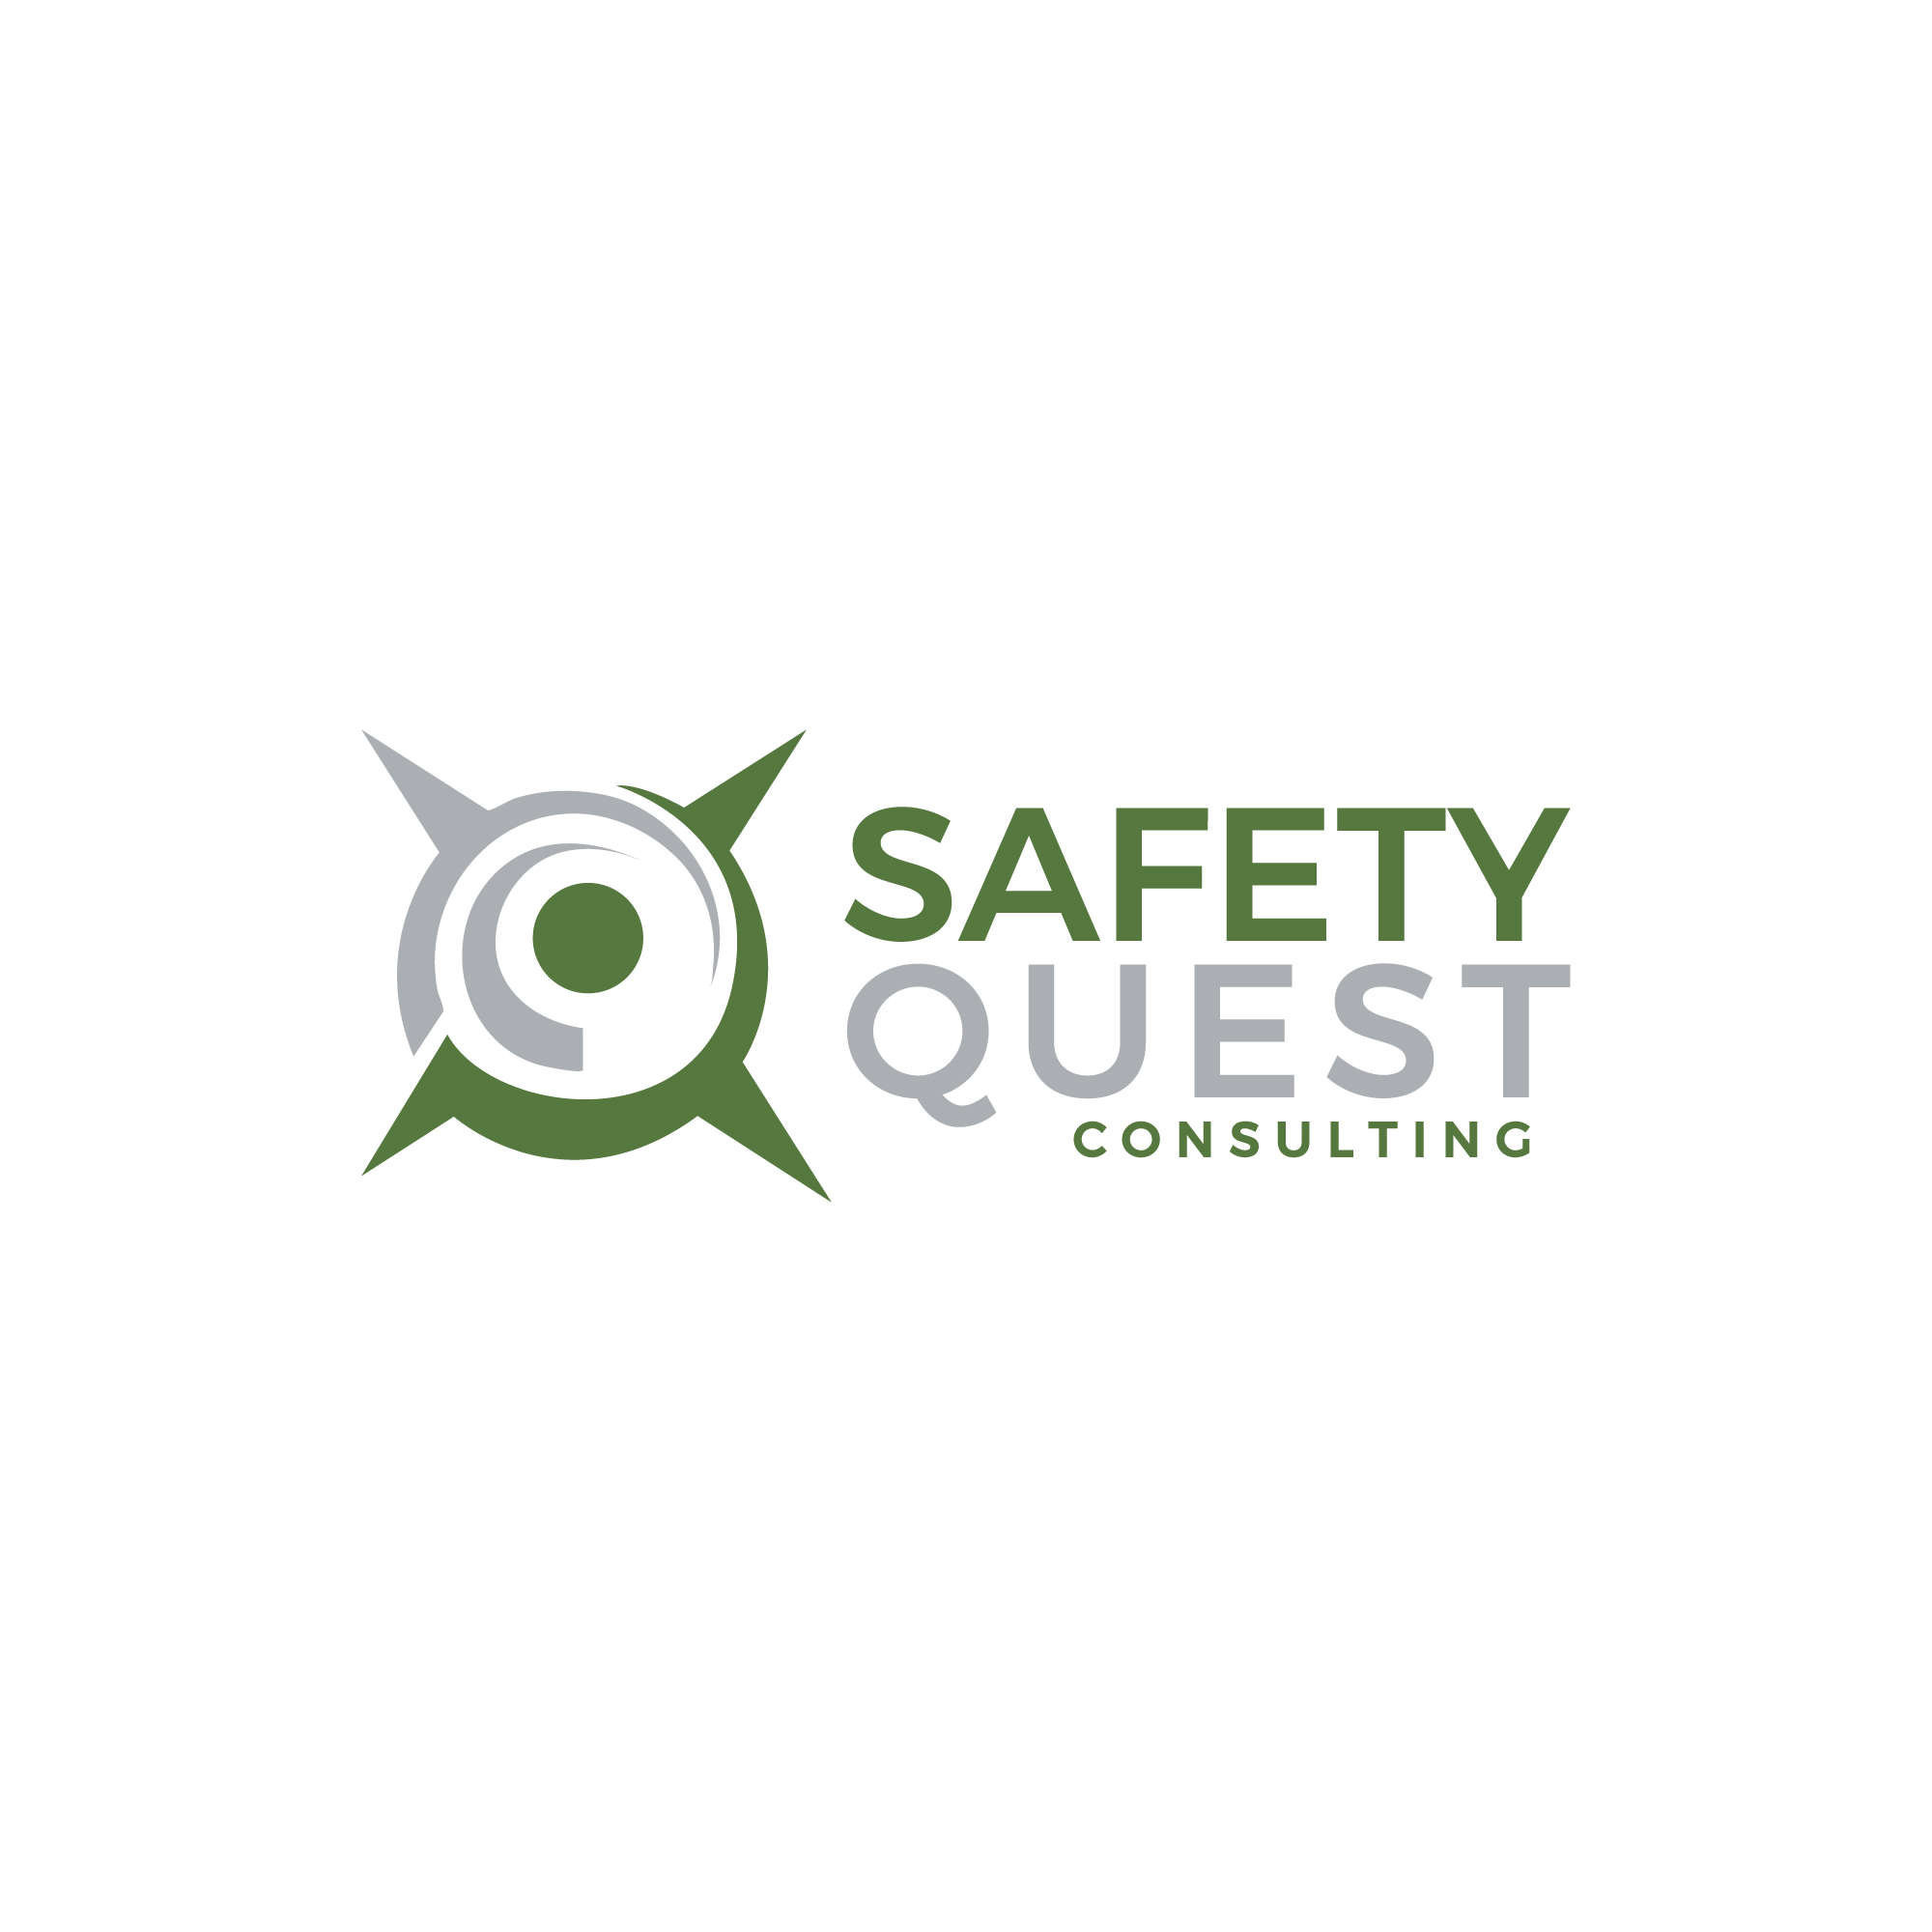 Safety Quest Consulting Logo